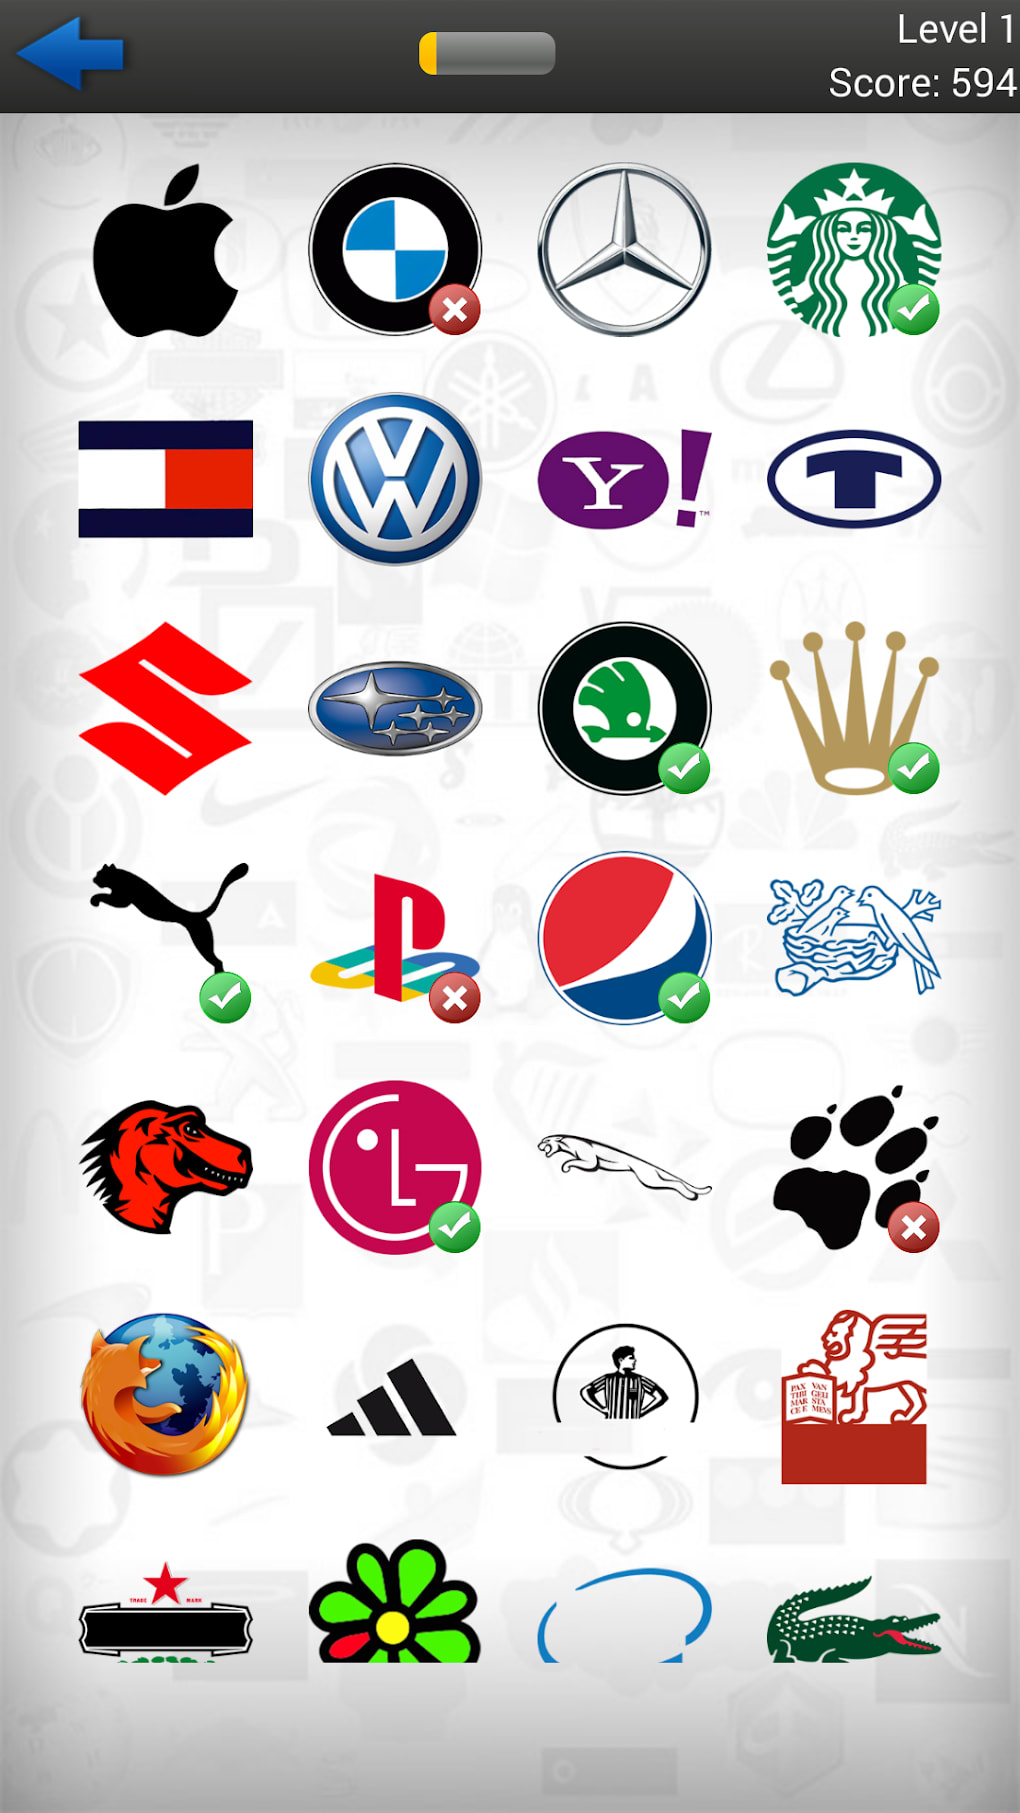 Ultimate Logo Quiz All Answers APK for Android Download